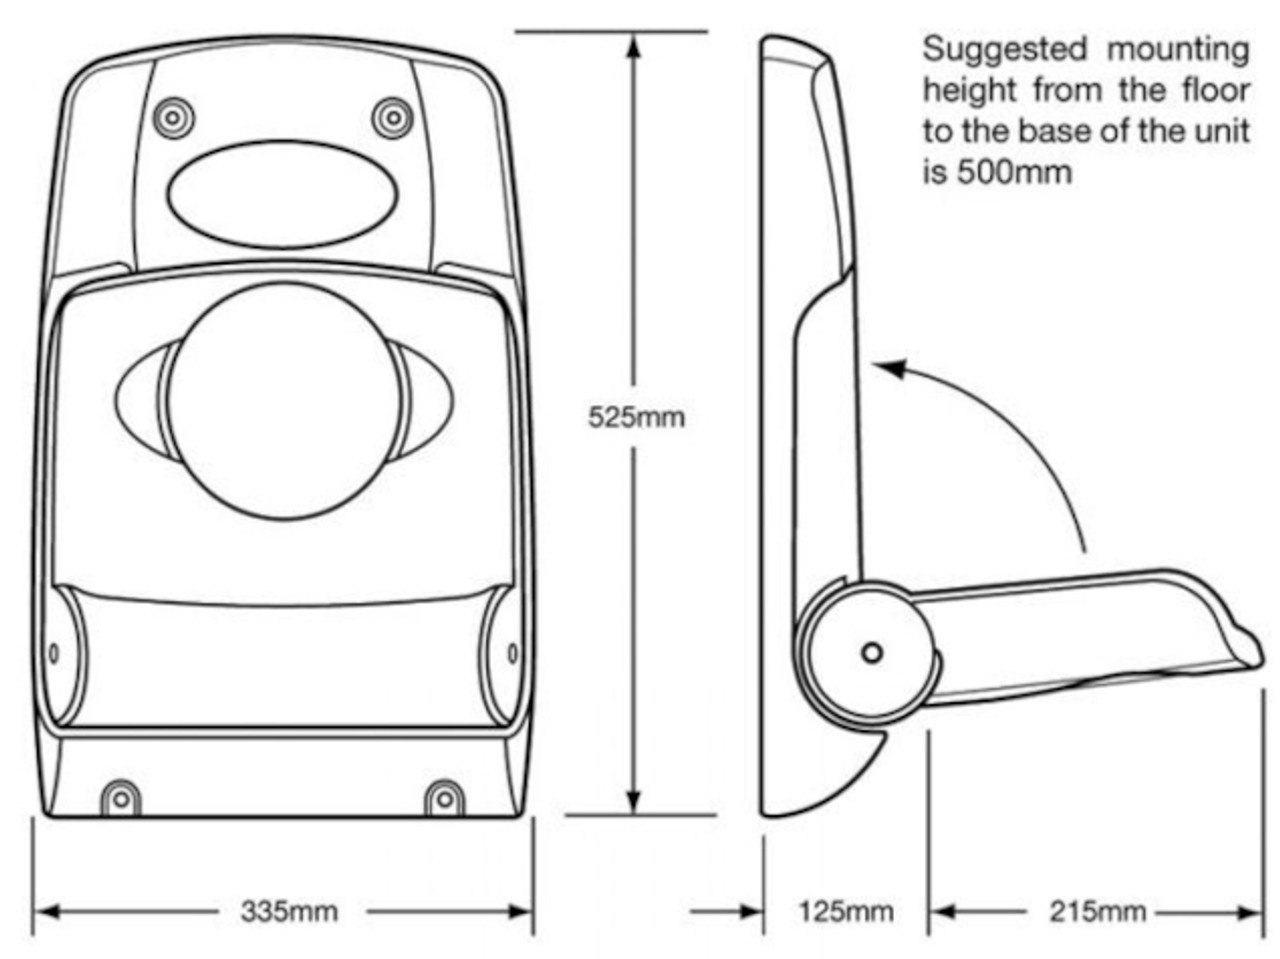 MX33WHT - Technical drawing of Stay-Safe Baby Seat showing dimensions when stowed and open